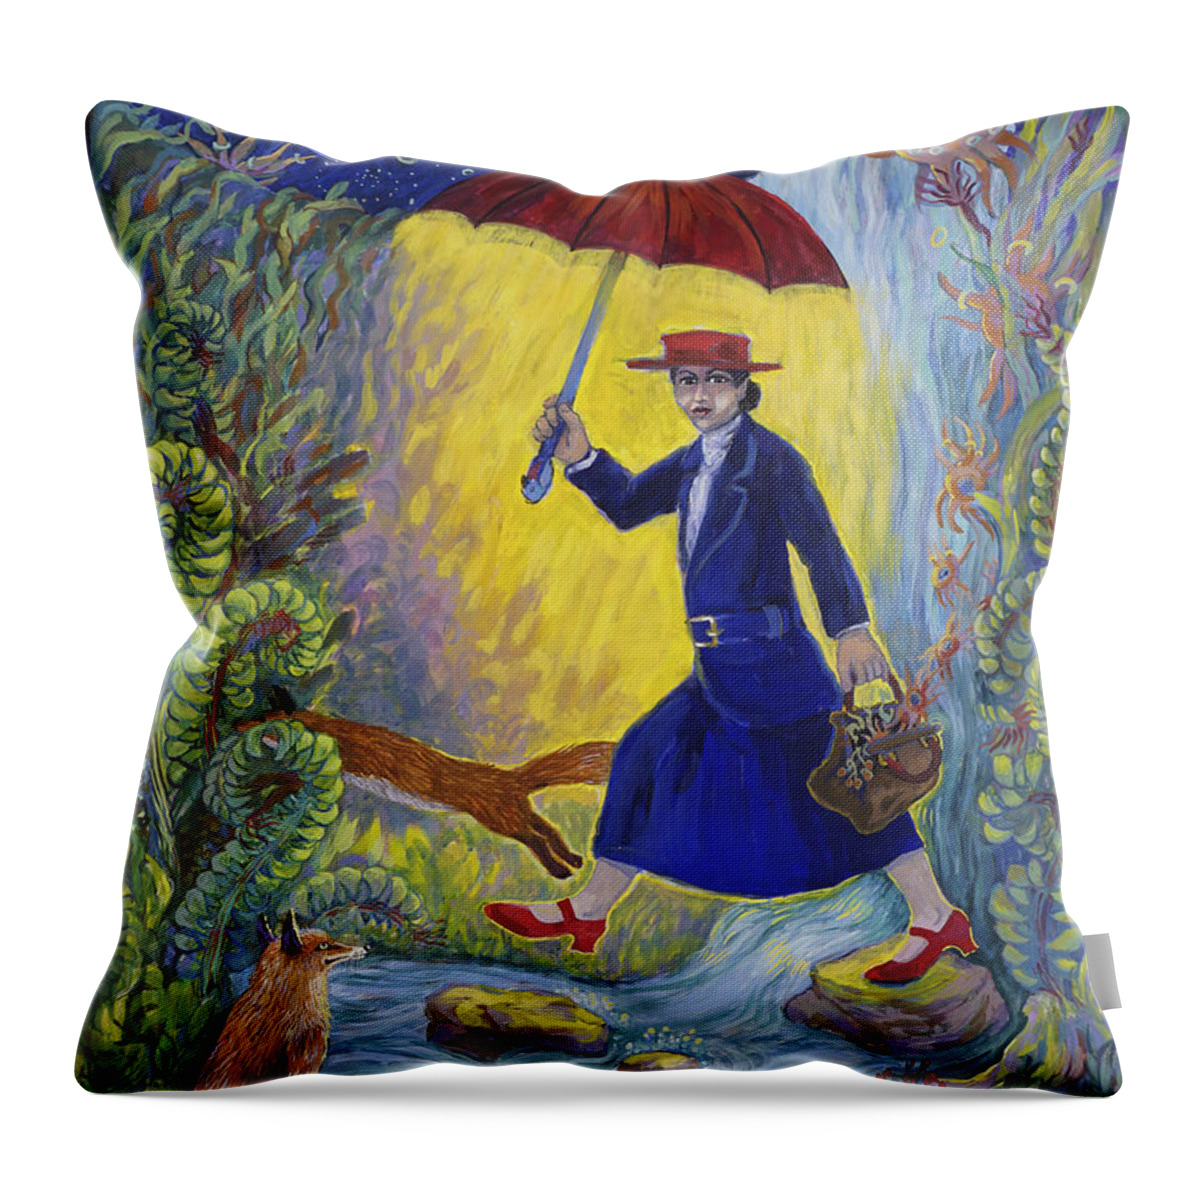 Landscape Throw Pillow featuring the painting Red Shoes Mary Poppins by Shoshanah Dubiner